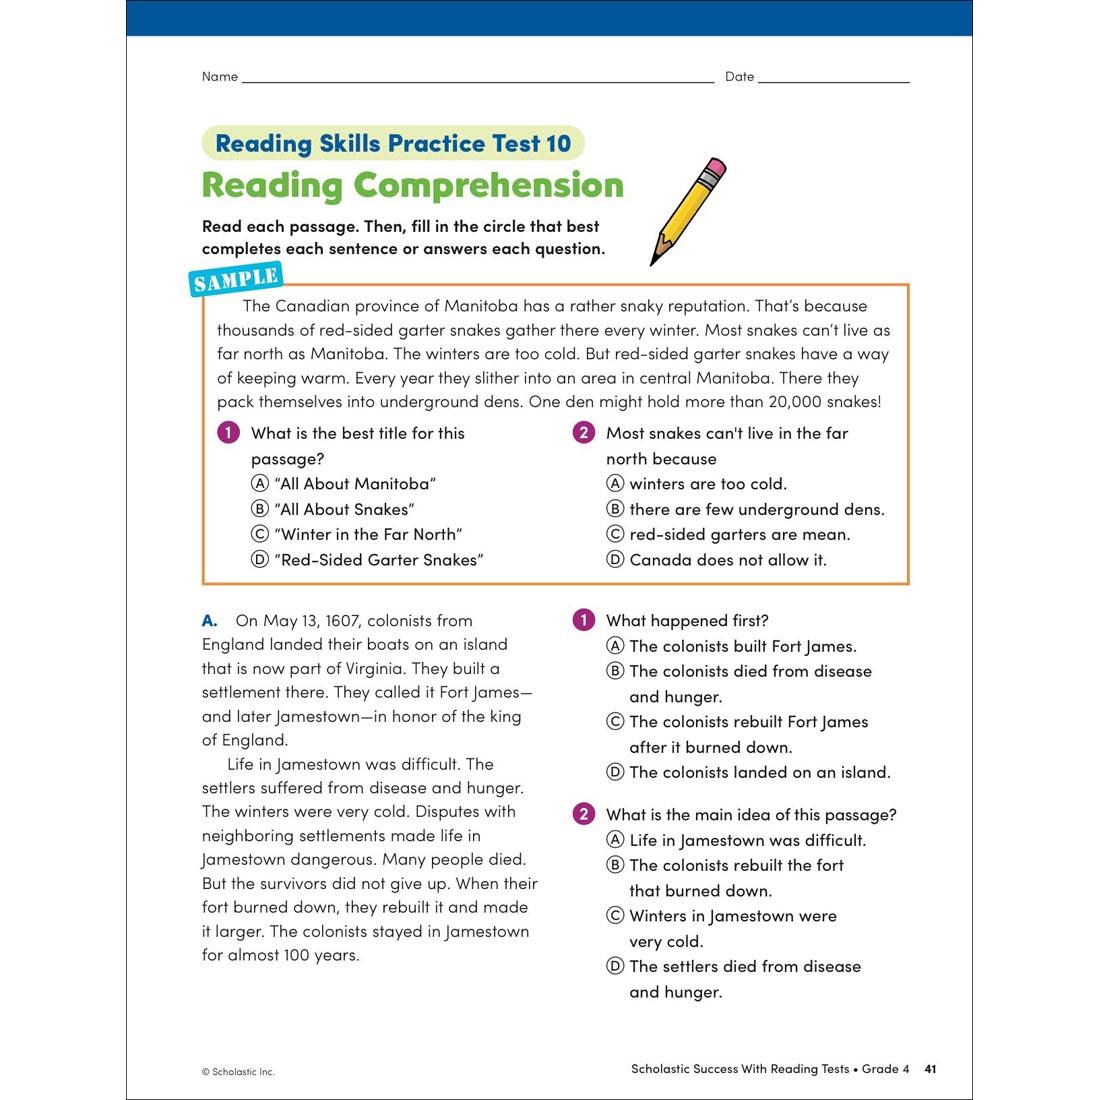 page 41 from Scholastic Success With Reading Tests Workbook Grade 4